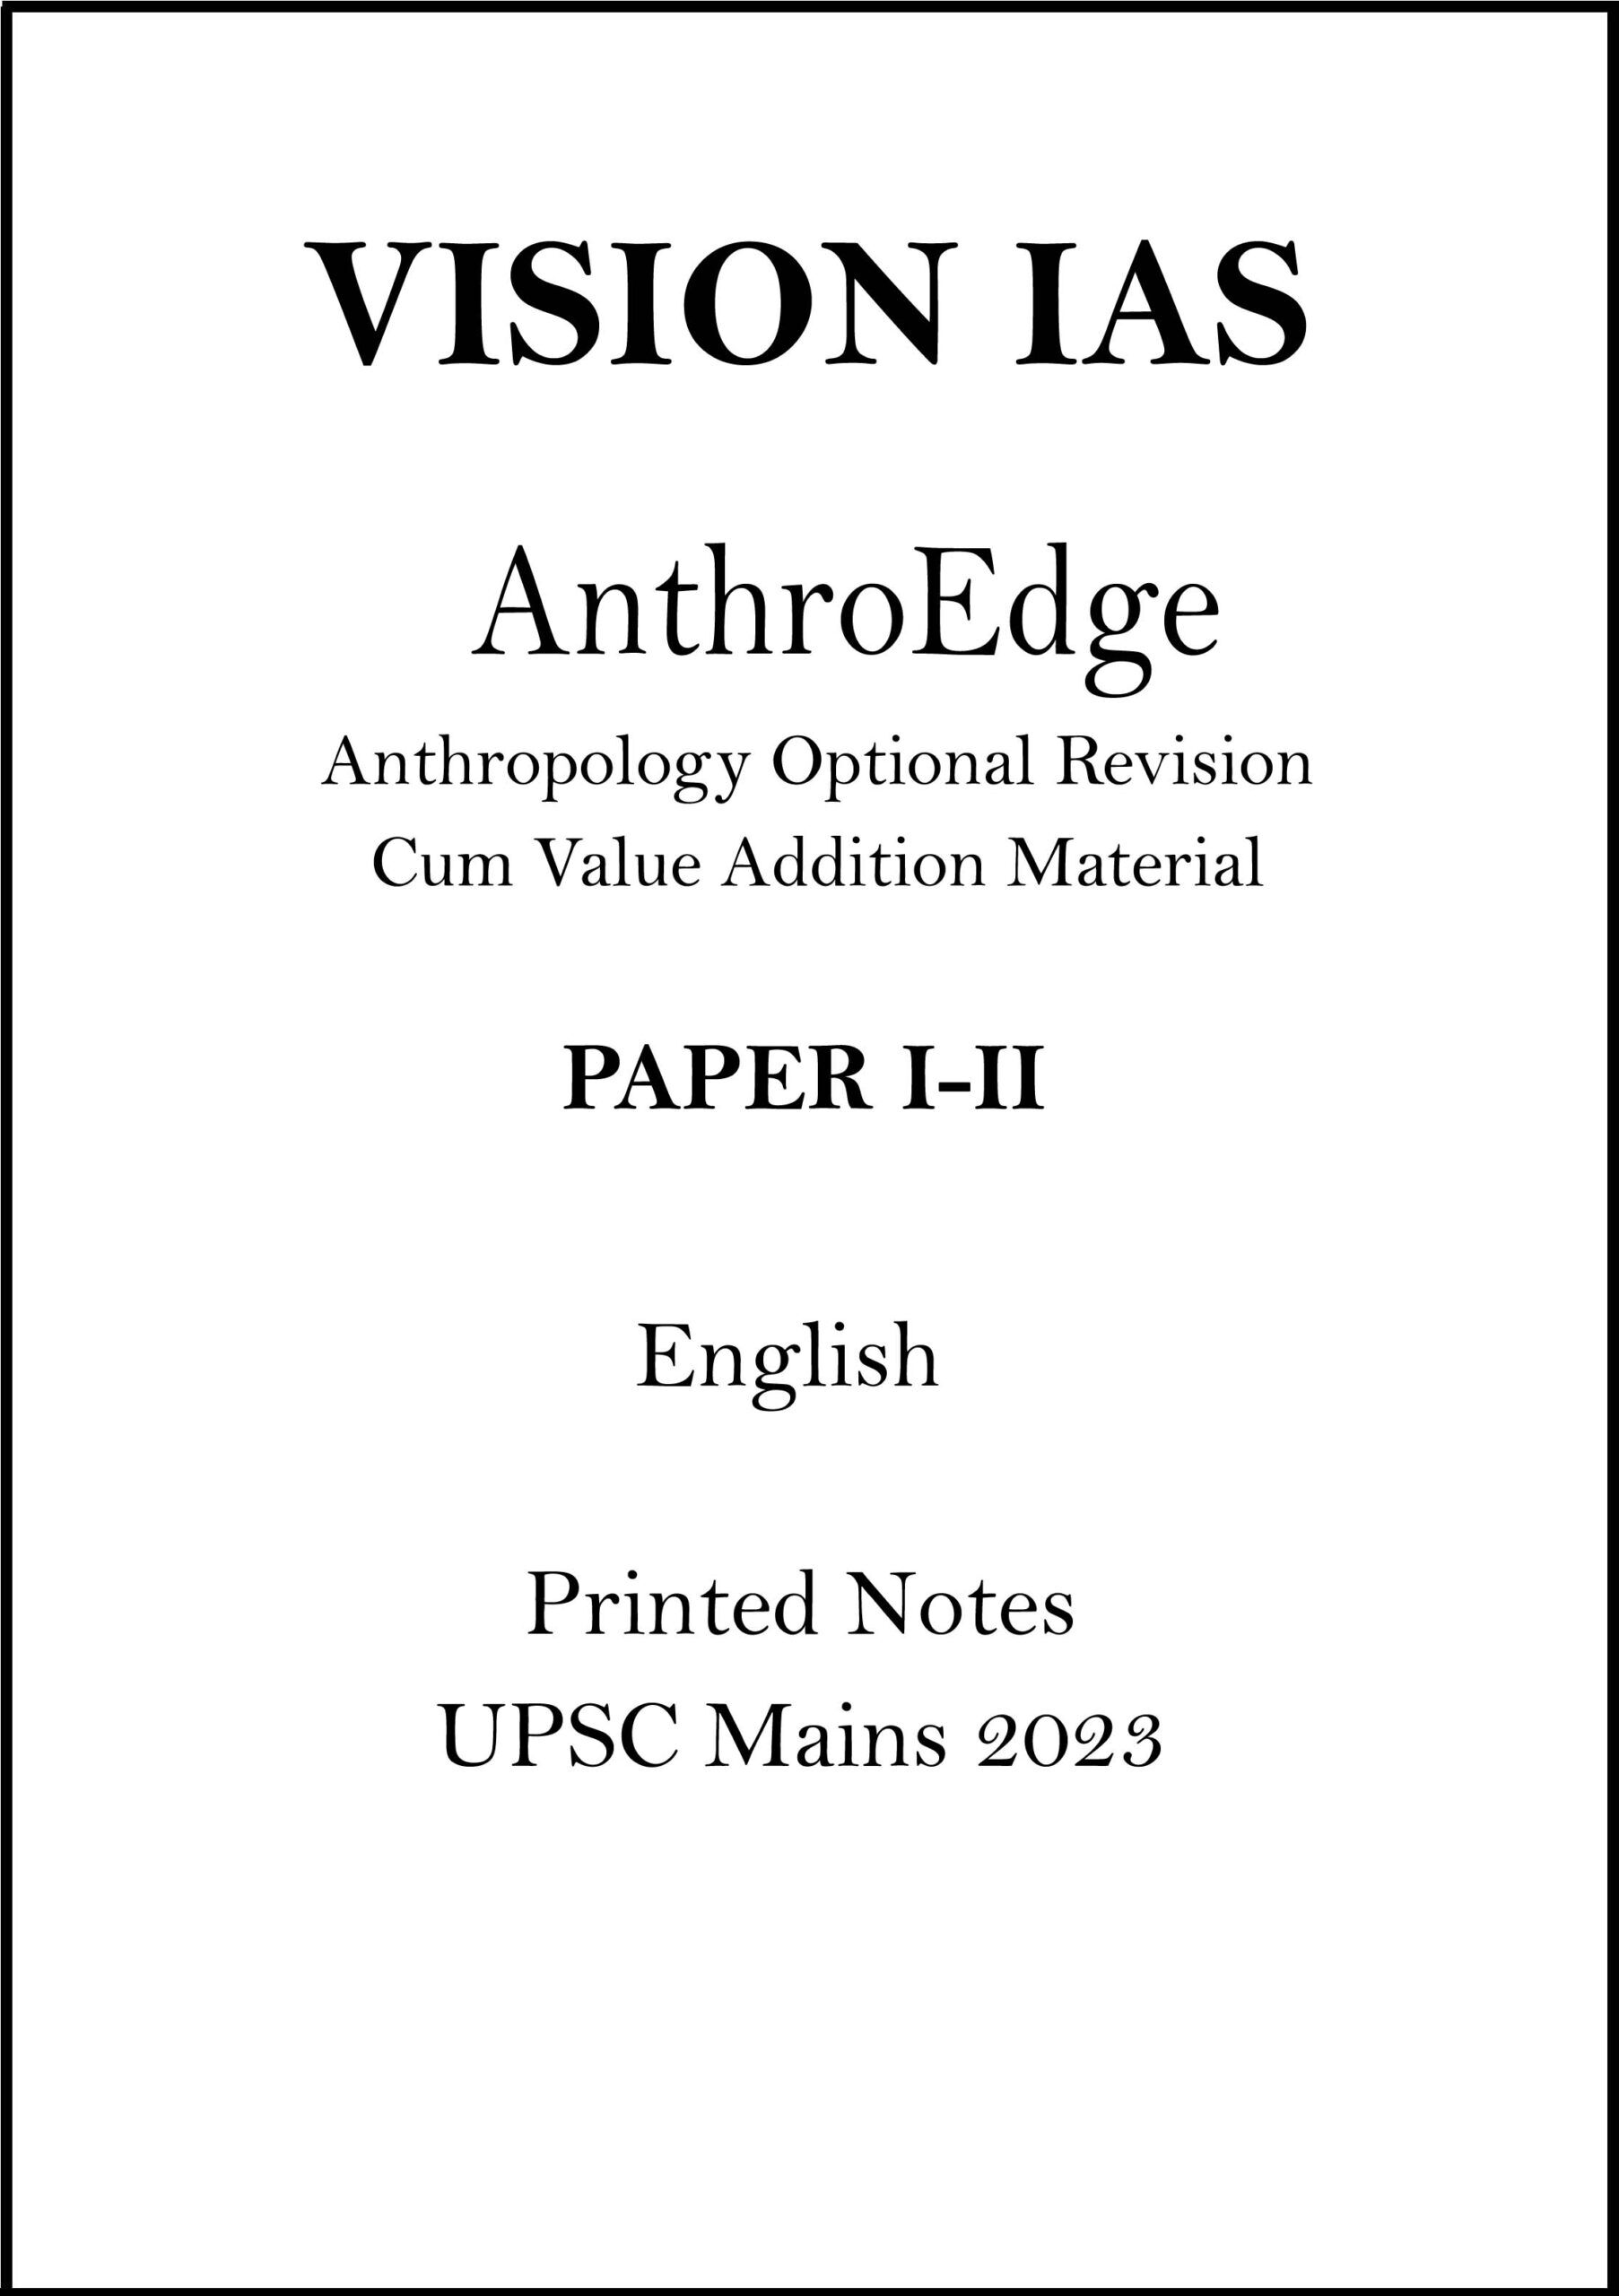 vision-ias-anthropology-revision-cum-value-addition-notes-for-mains